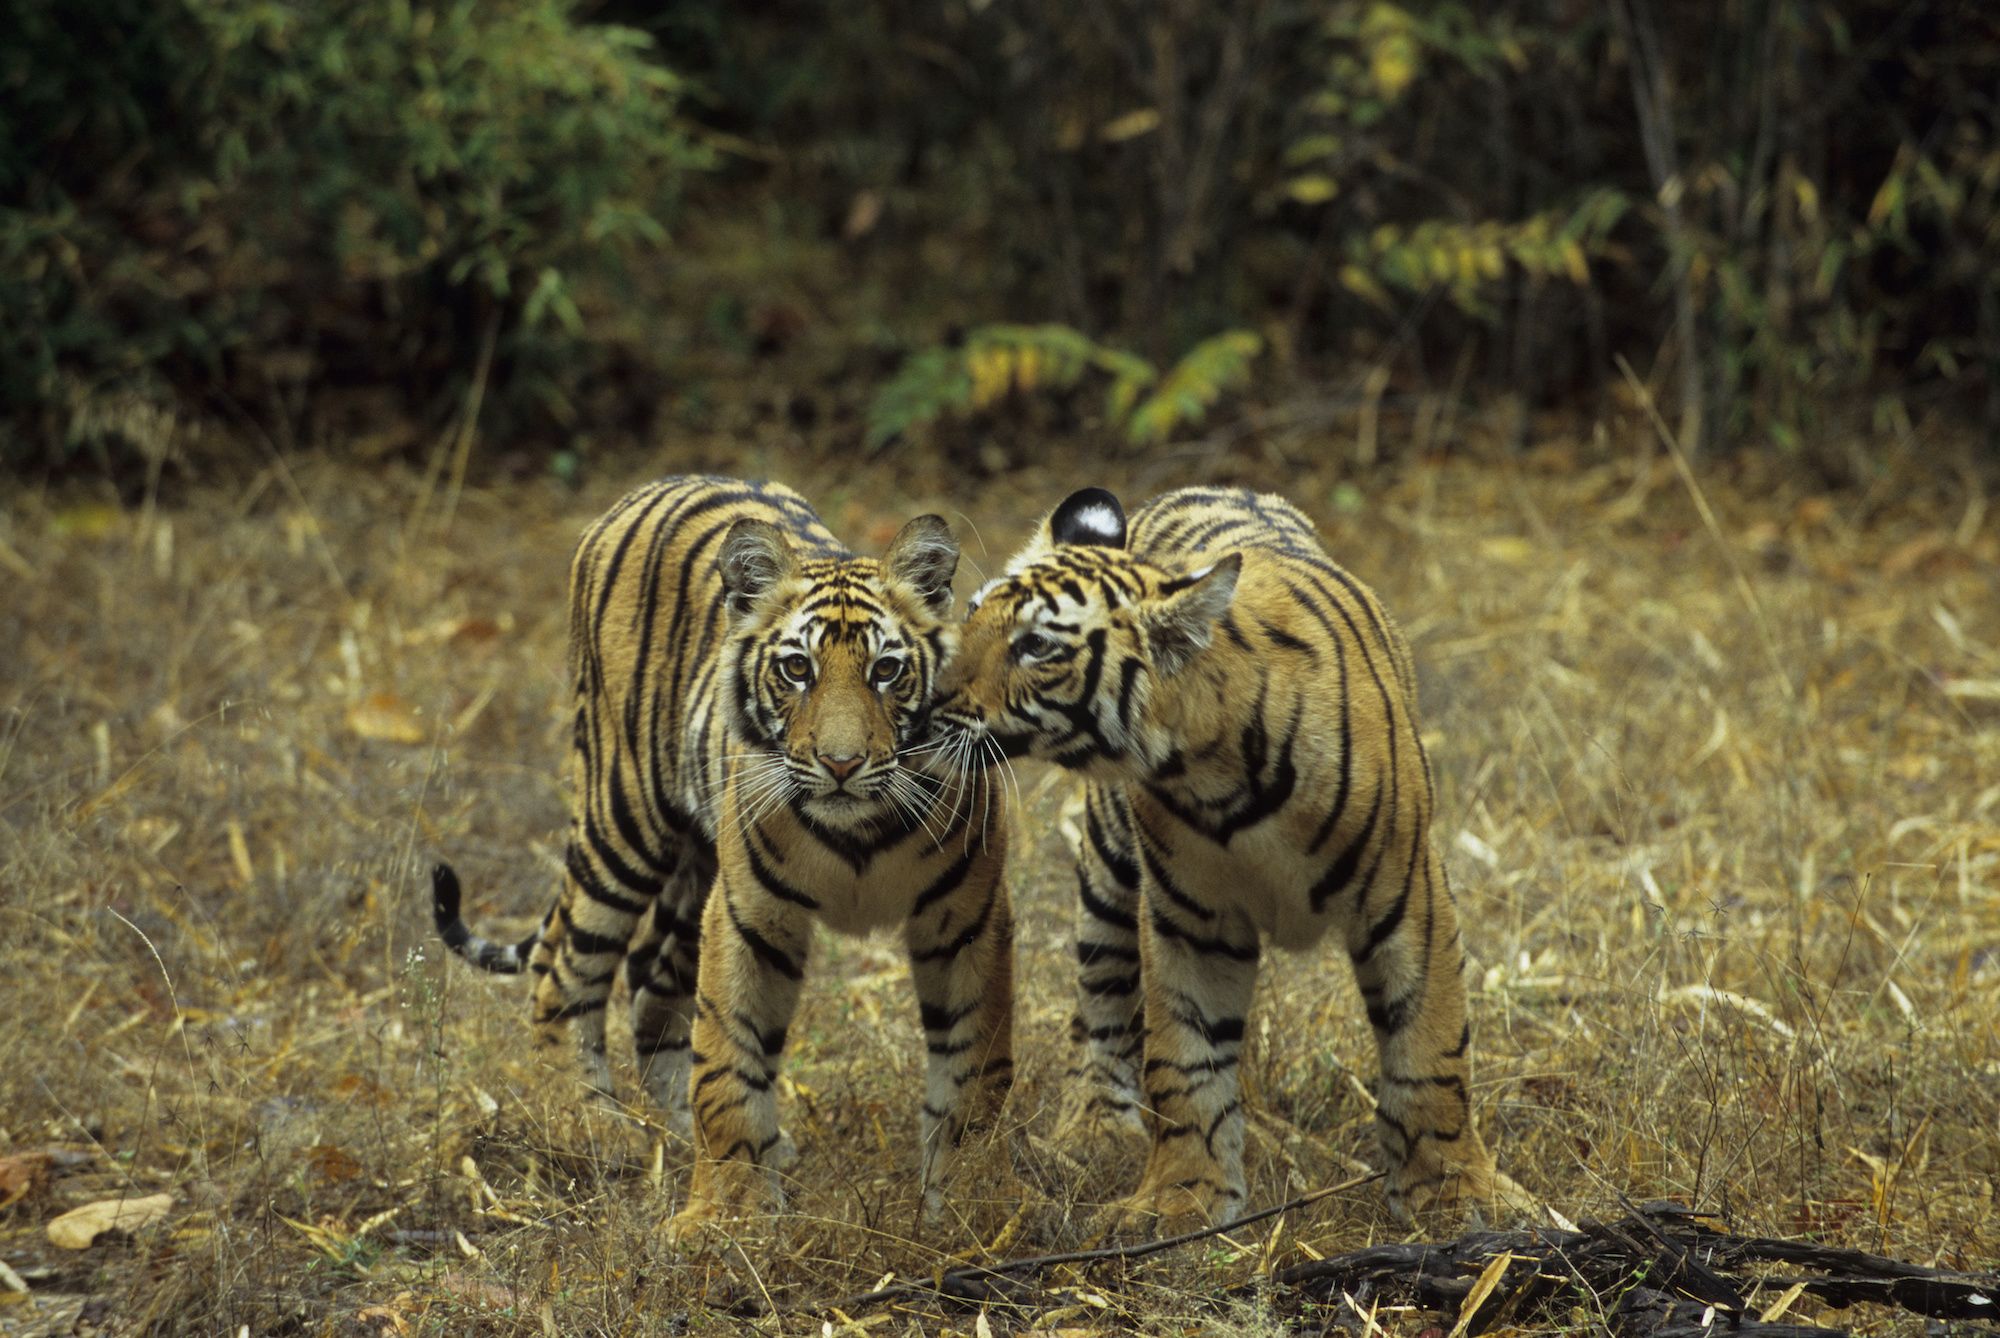 All about White Tigers in India - Bandhavgarh National Park